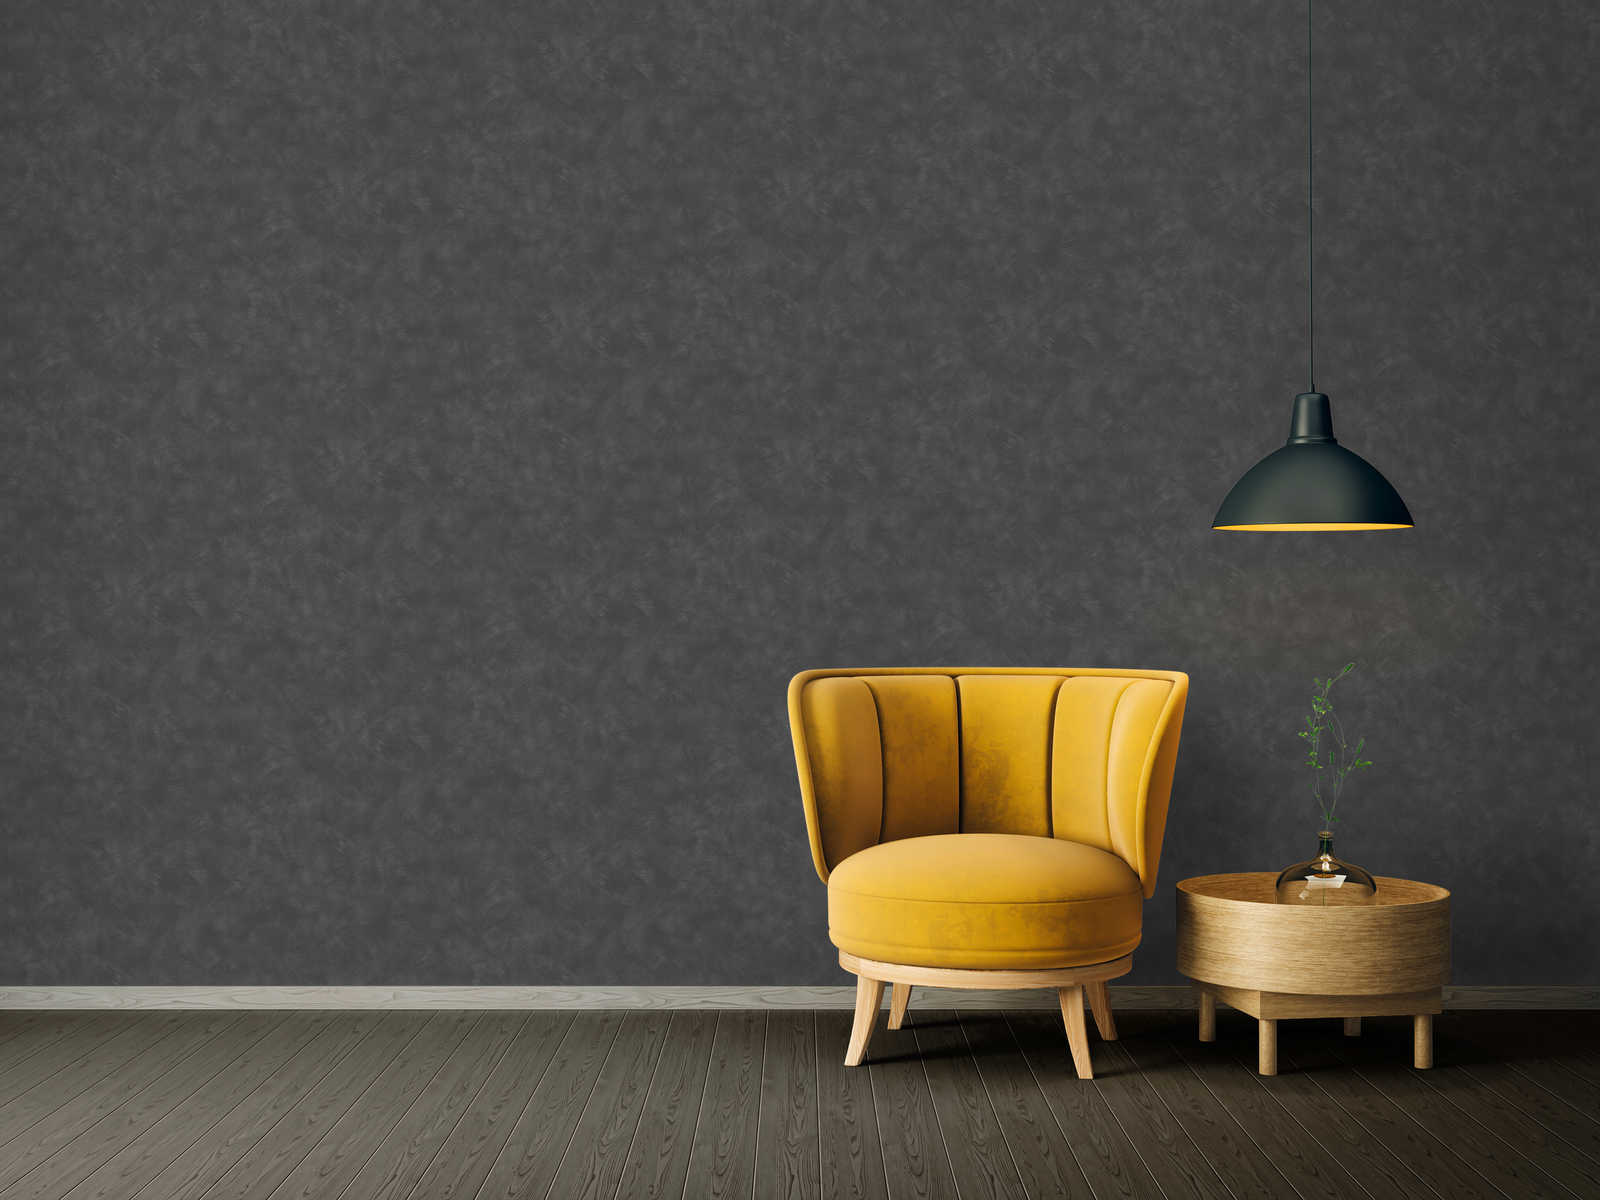             Wallpaper anthracite with panel optics & wipe structure - grey
        